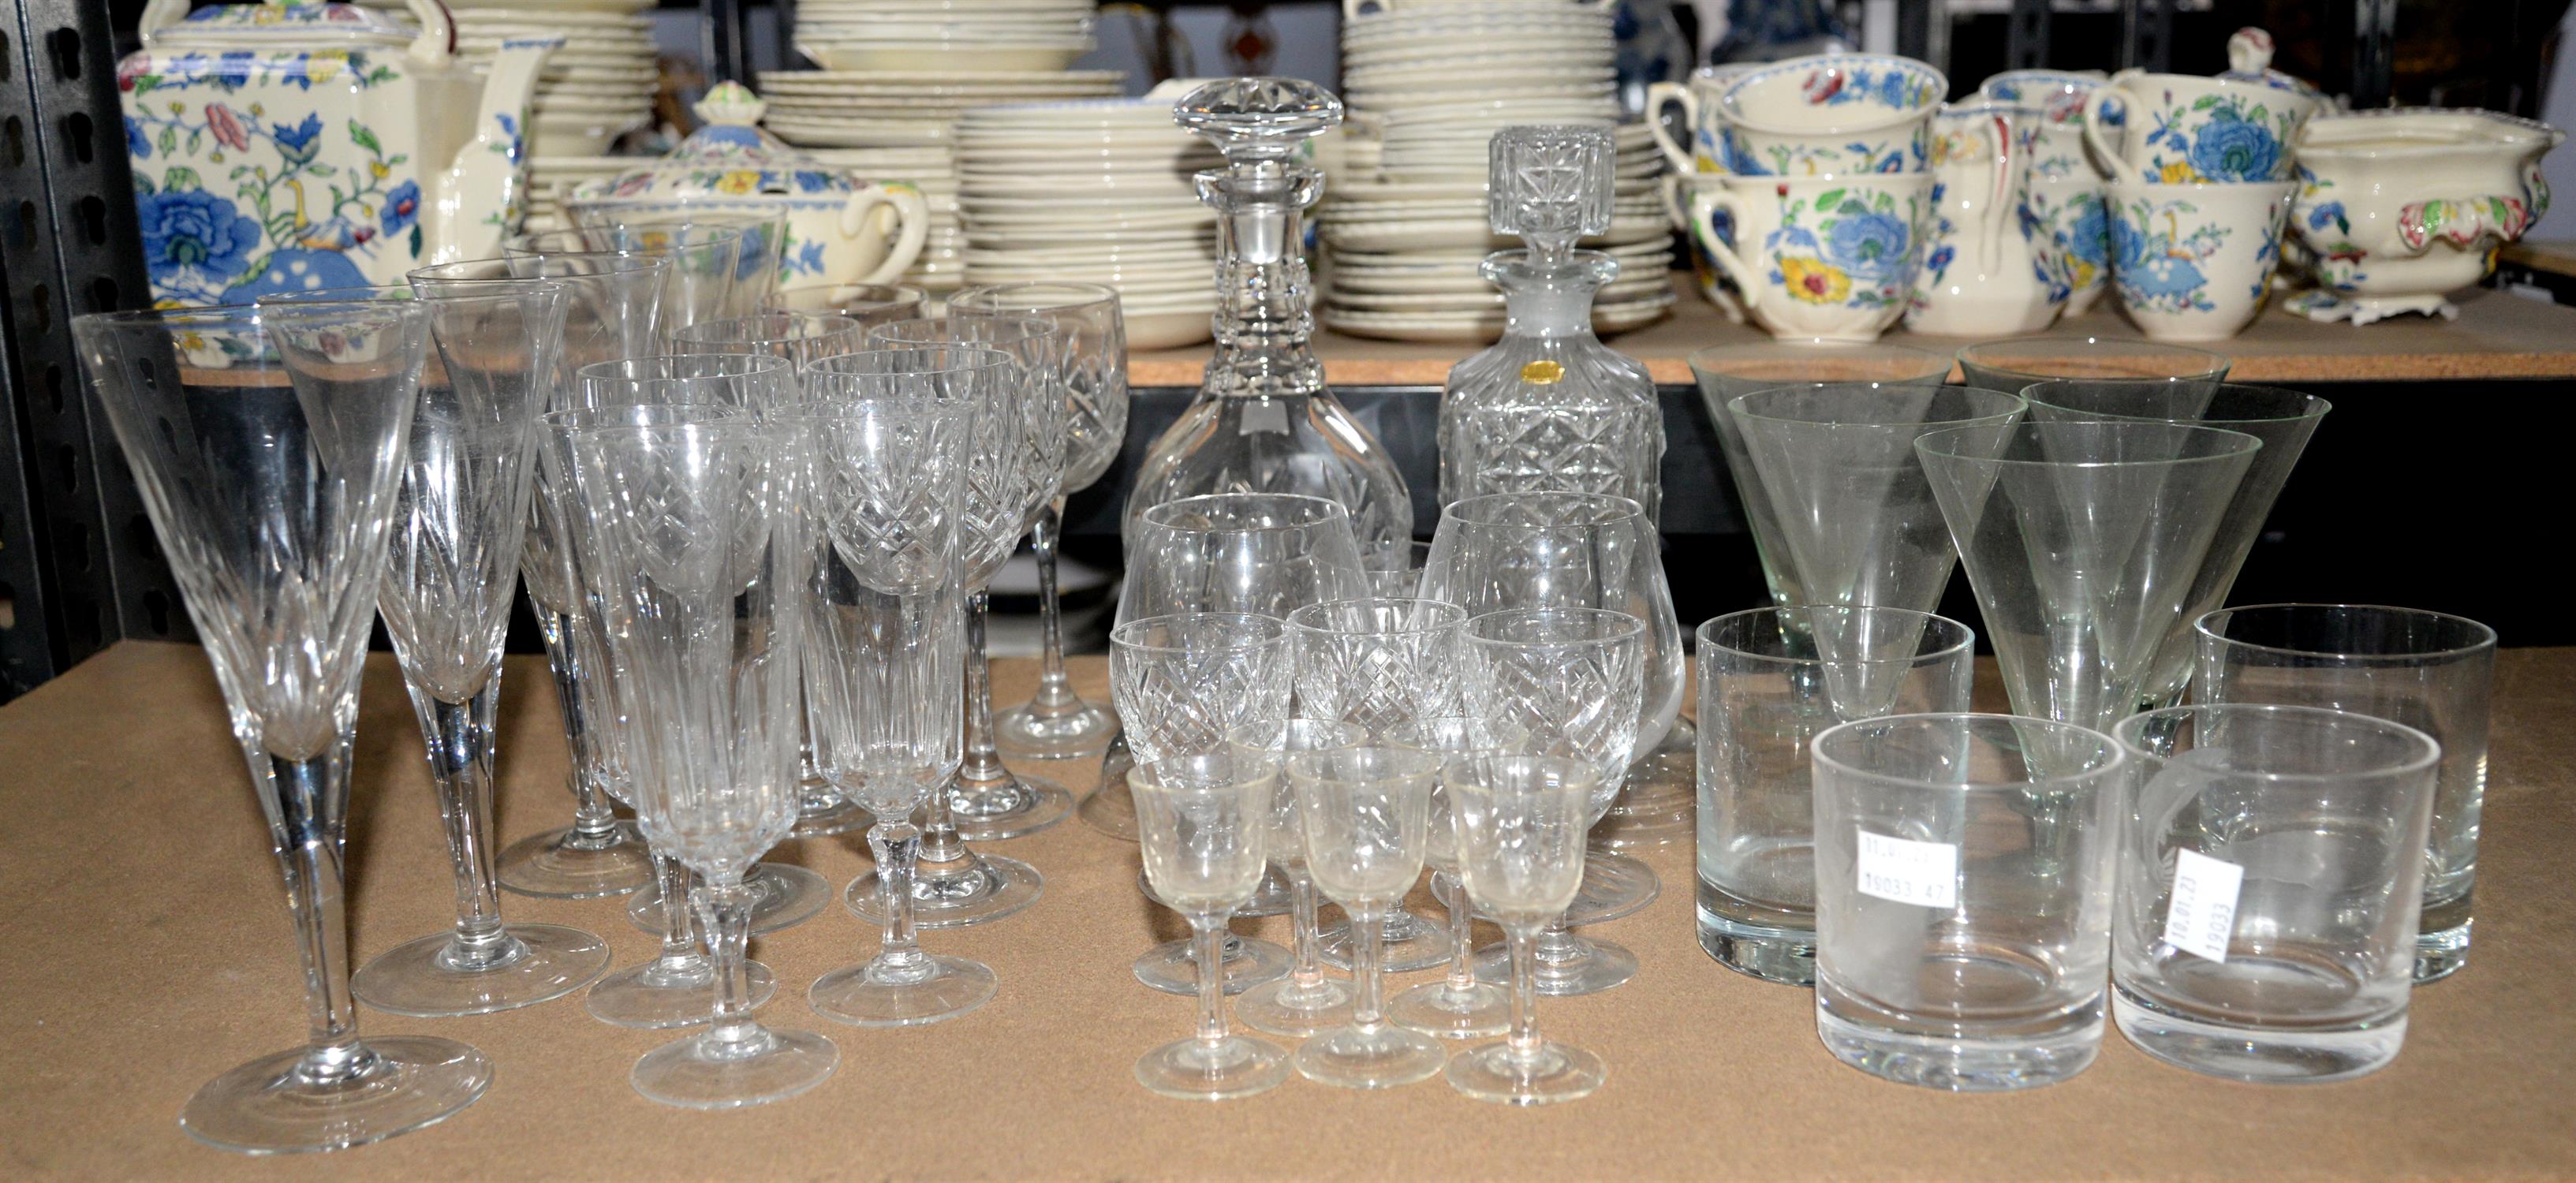 Glassware including cut glass decanters and glasses of various form including tumblers, - Image 2 of 2